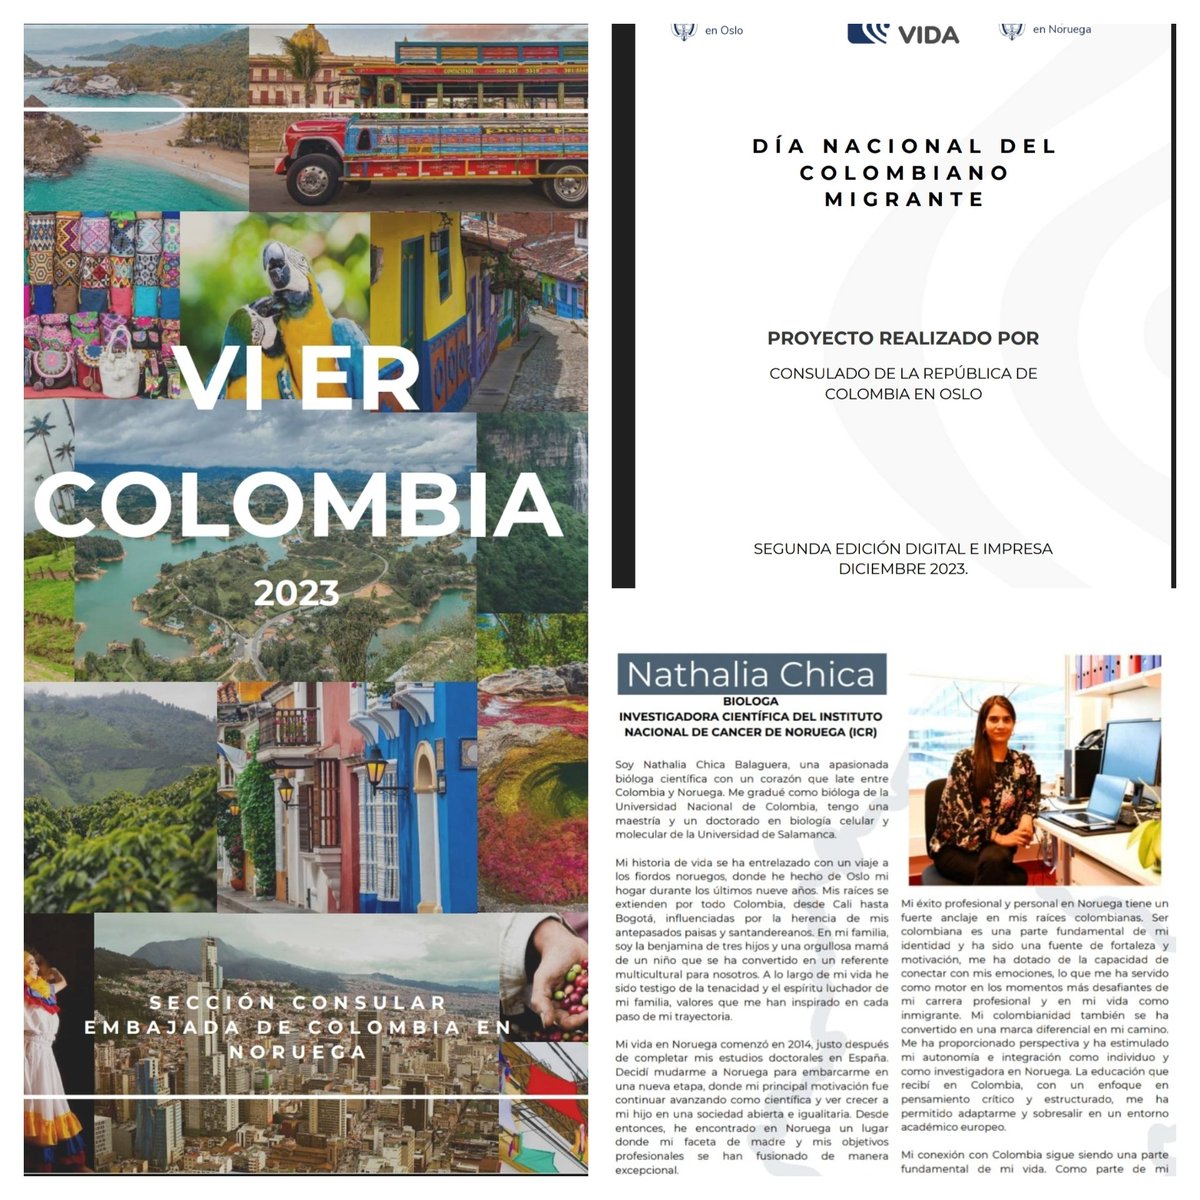 Thrilled to be featured in the latest publication by the Colombian Embassy of Norway, highlighting migration and professional growth opportunities for Colombians in Norway. Grateful for the recognition! 🇨🇴🇳🇴
t.ly/8ELIt👇@CancilleriaCol